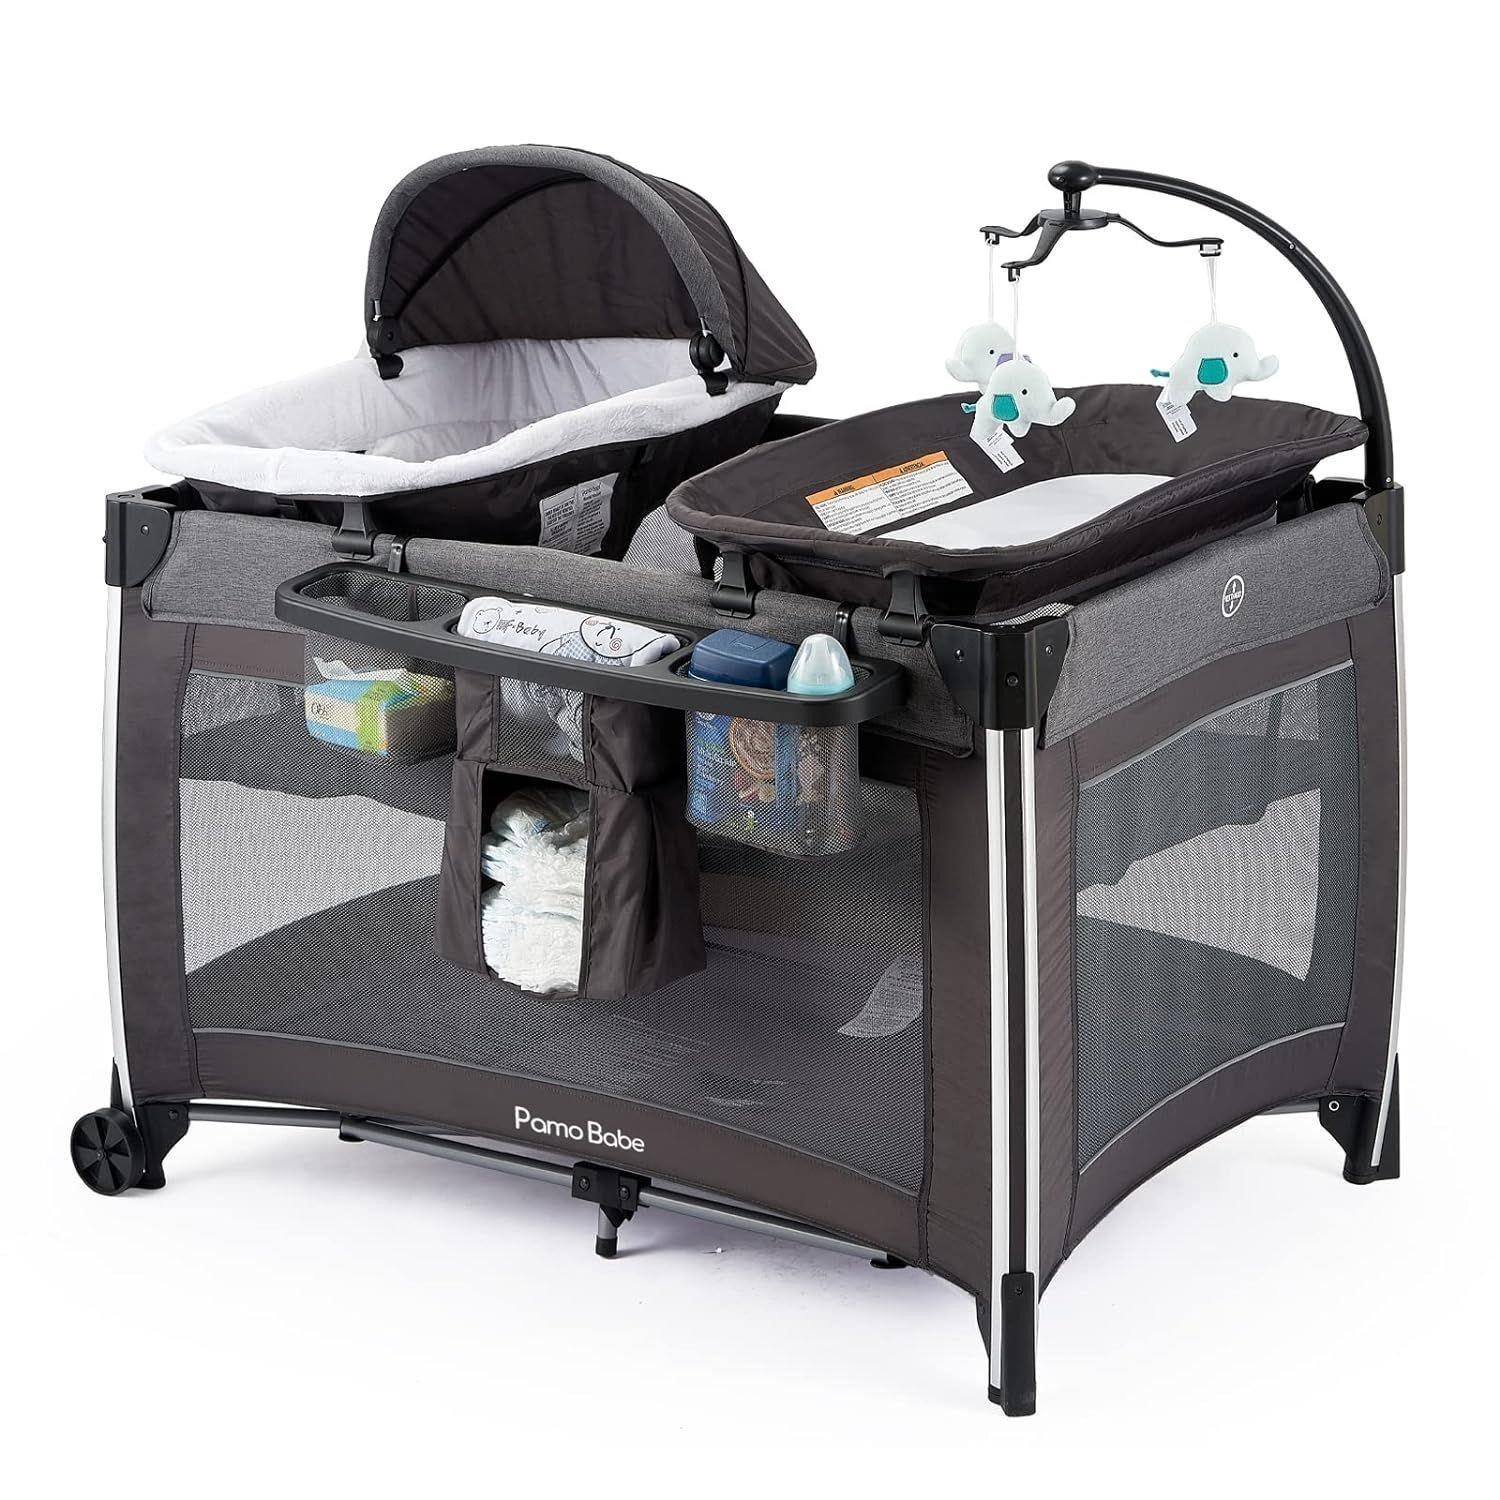 Pamo Babe 4 in 1 Portable Baby Crib Deluxe